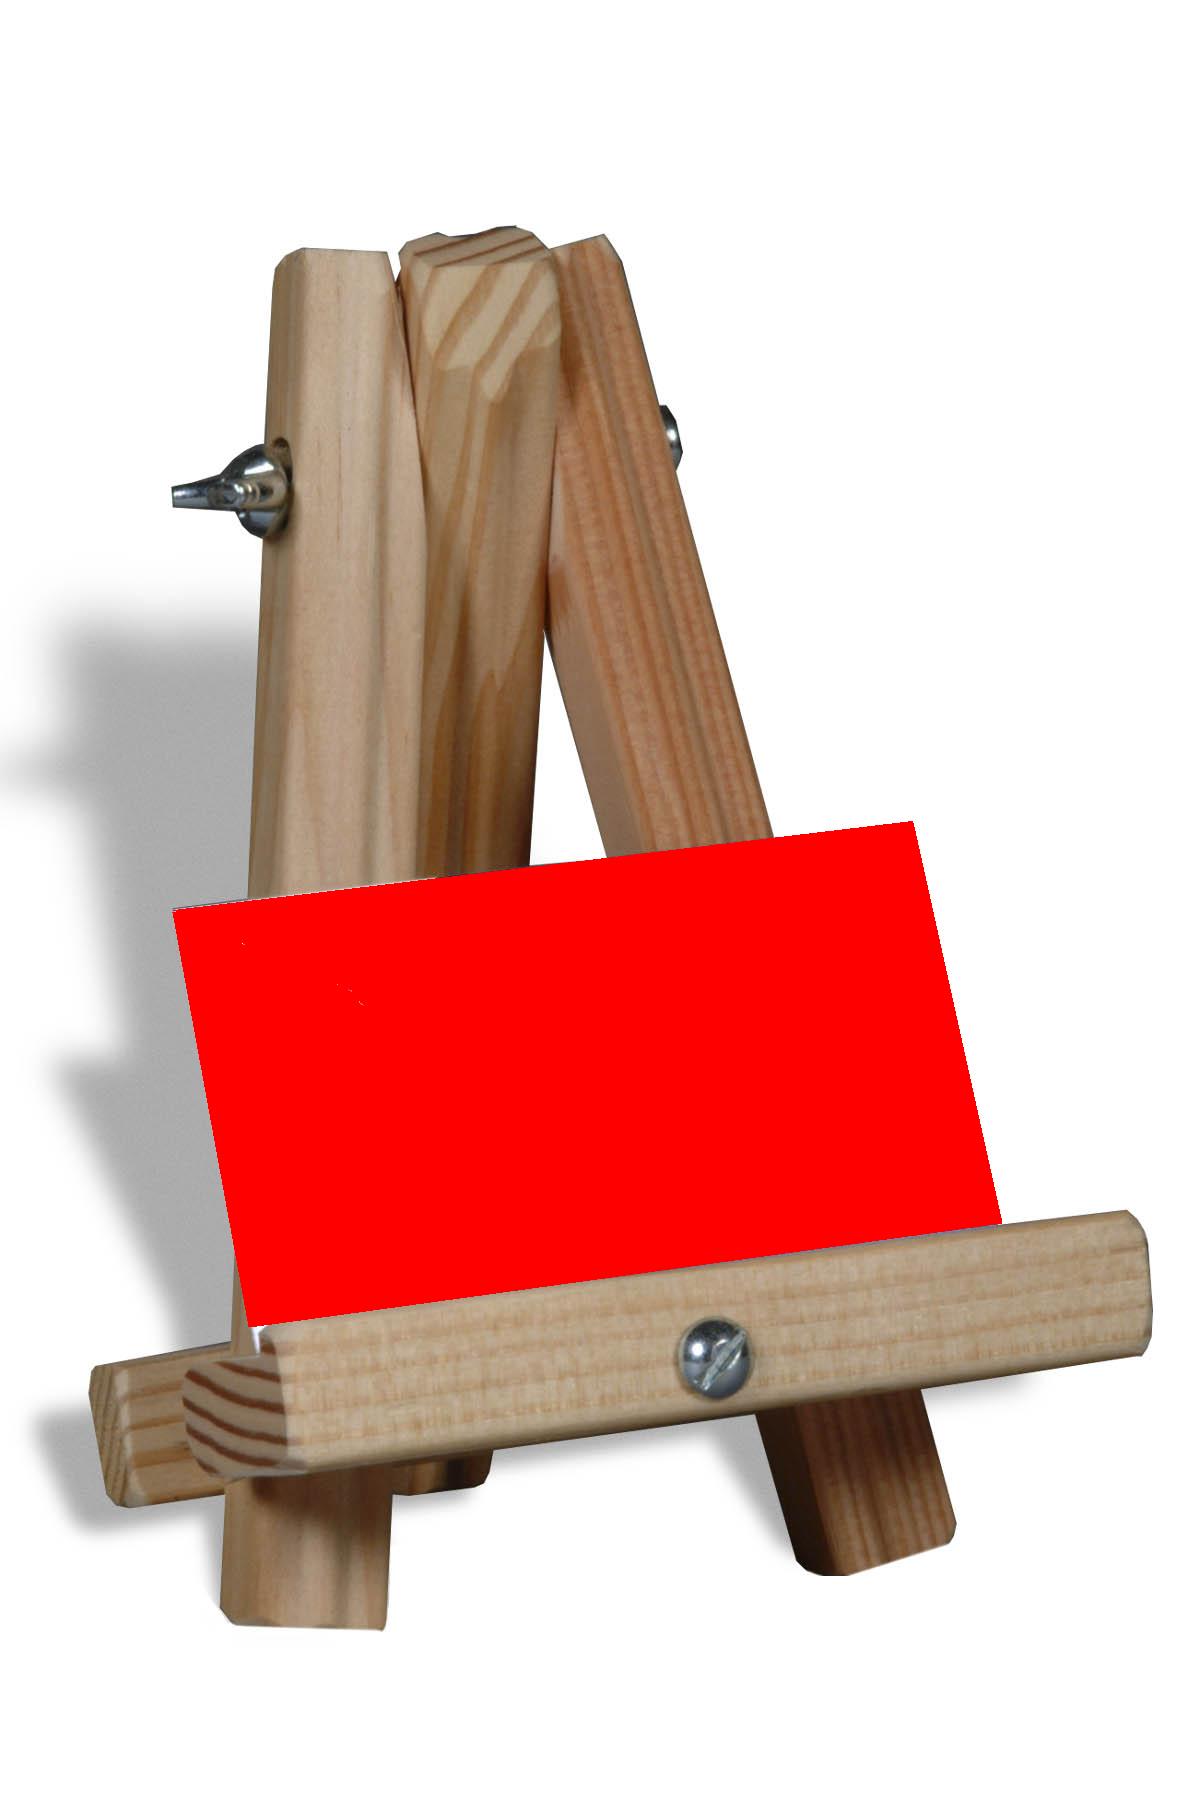 Red Wood Easel 